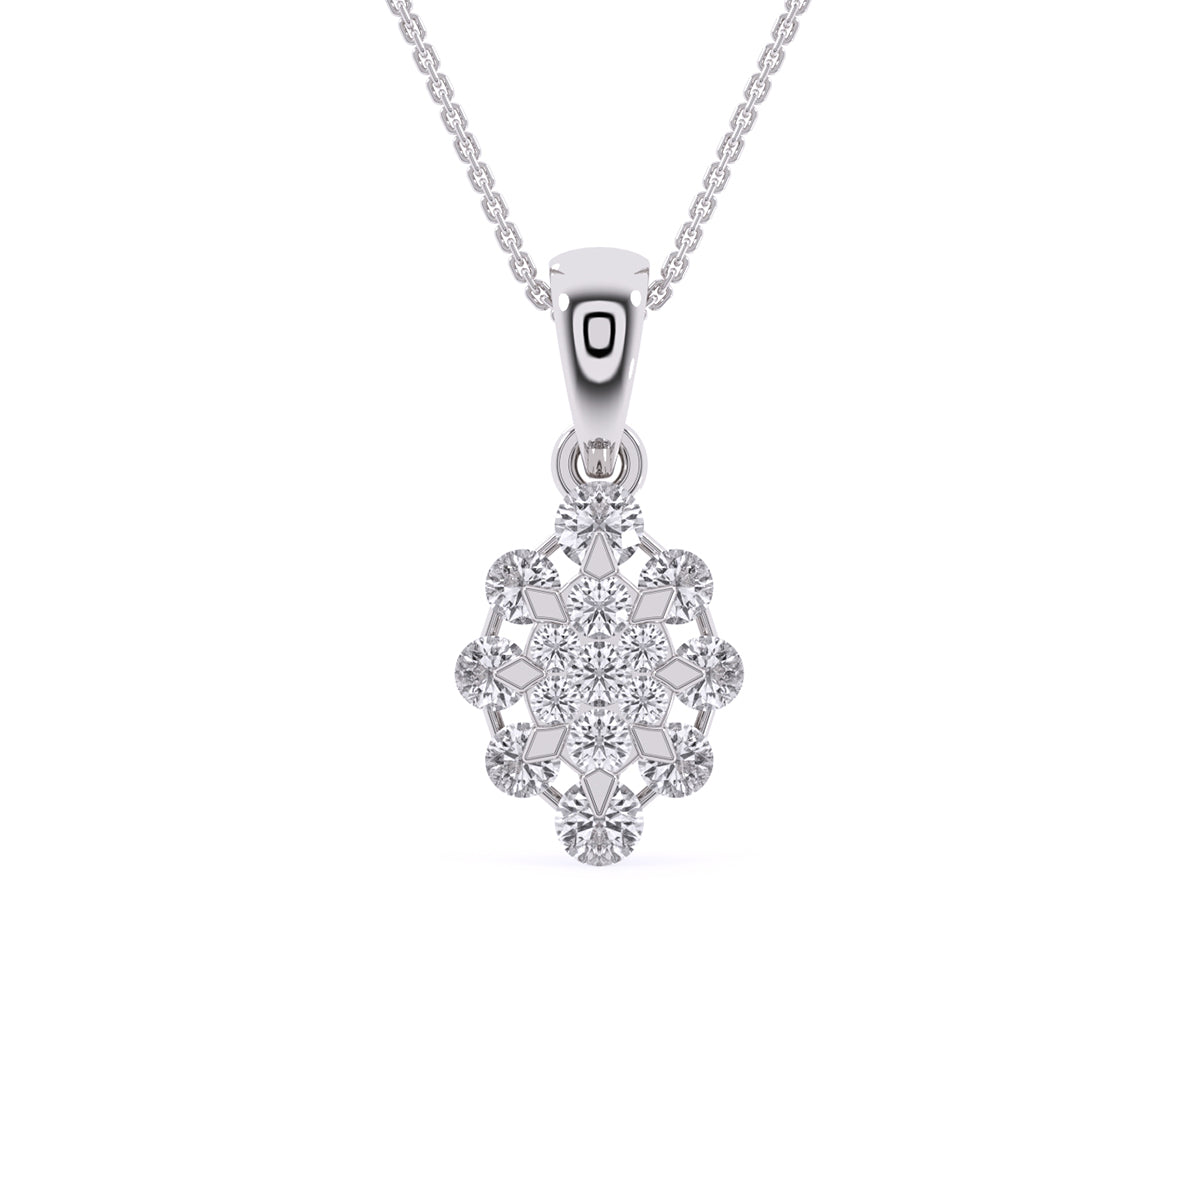 Buy Amanda Rose Collection AGS Certified 1/3ct REAL Diamond Solitaire Pendant  Necklace for Women in 14K White Gold on an 18 in. Box Chain, Gold Diamond,  white-diamond at Amazon.in